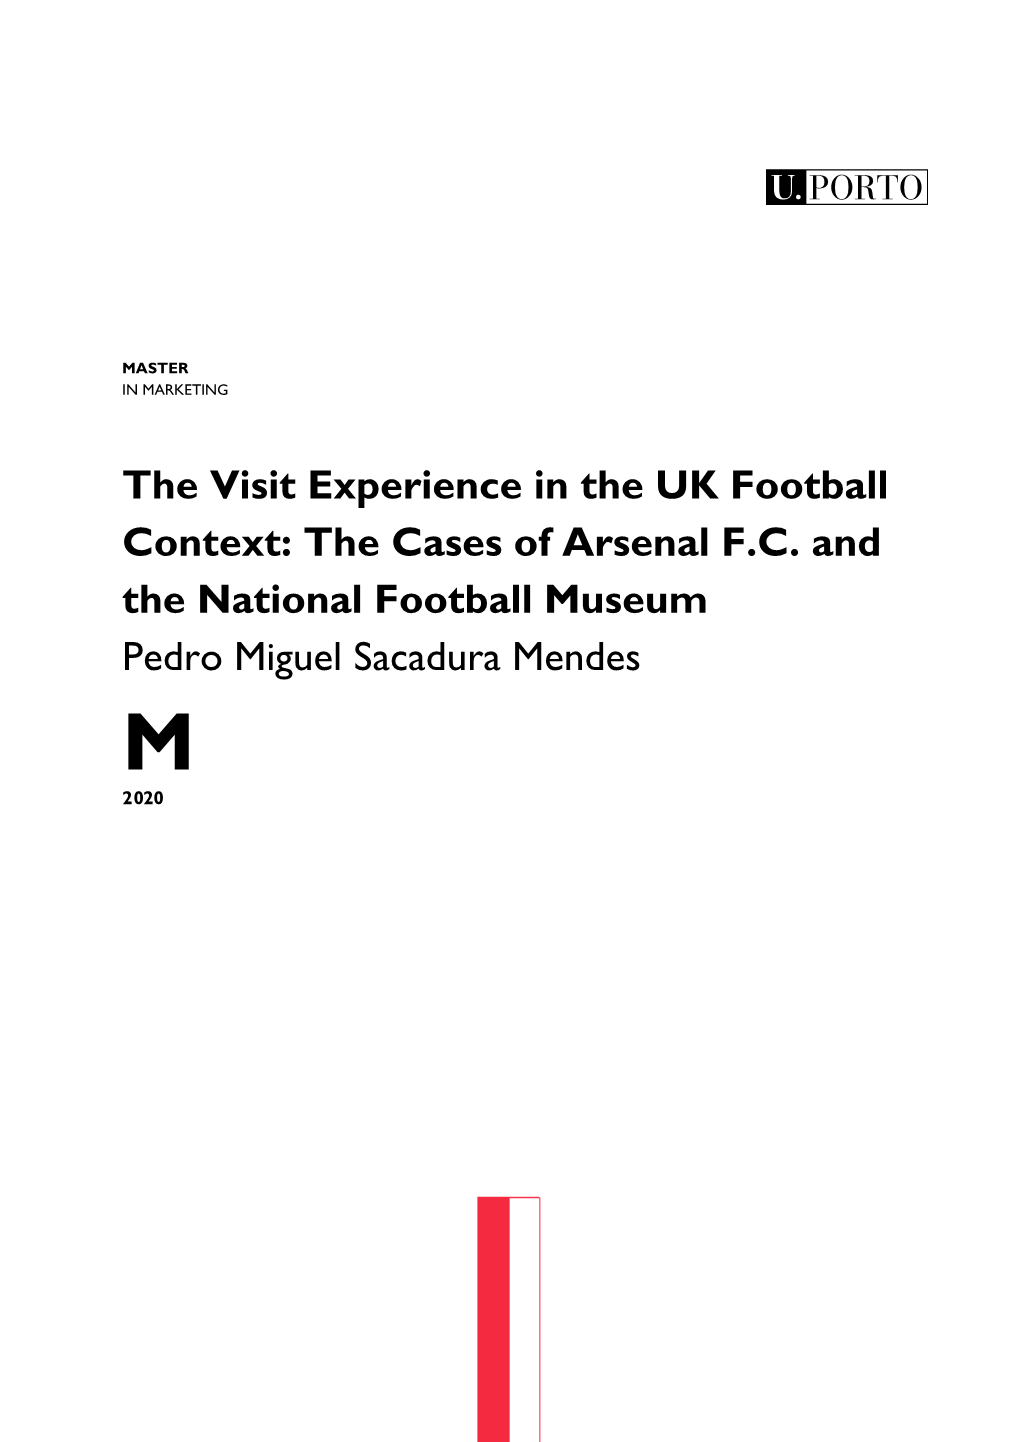 The Cases of Arsenal FC and the National Football Museum